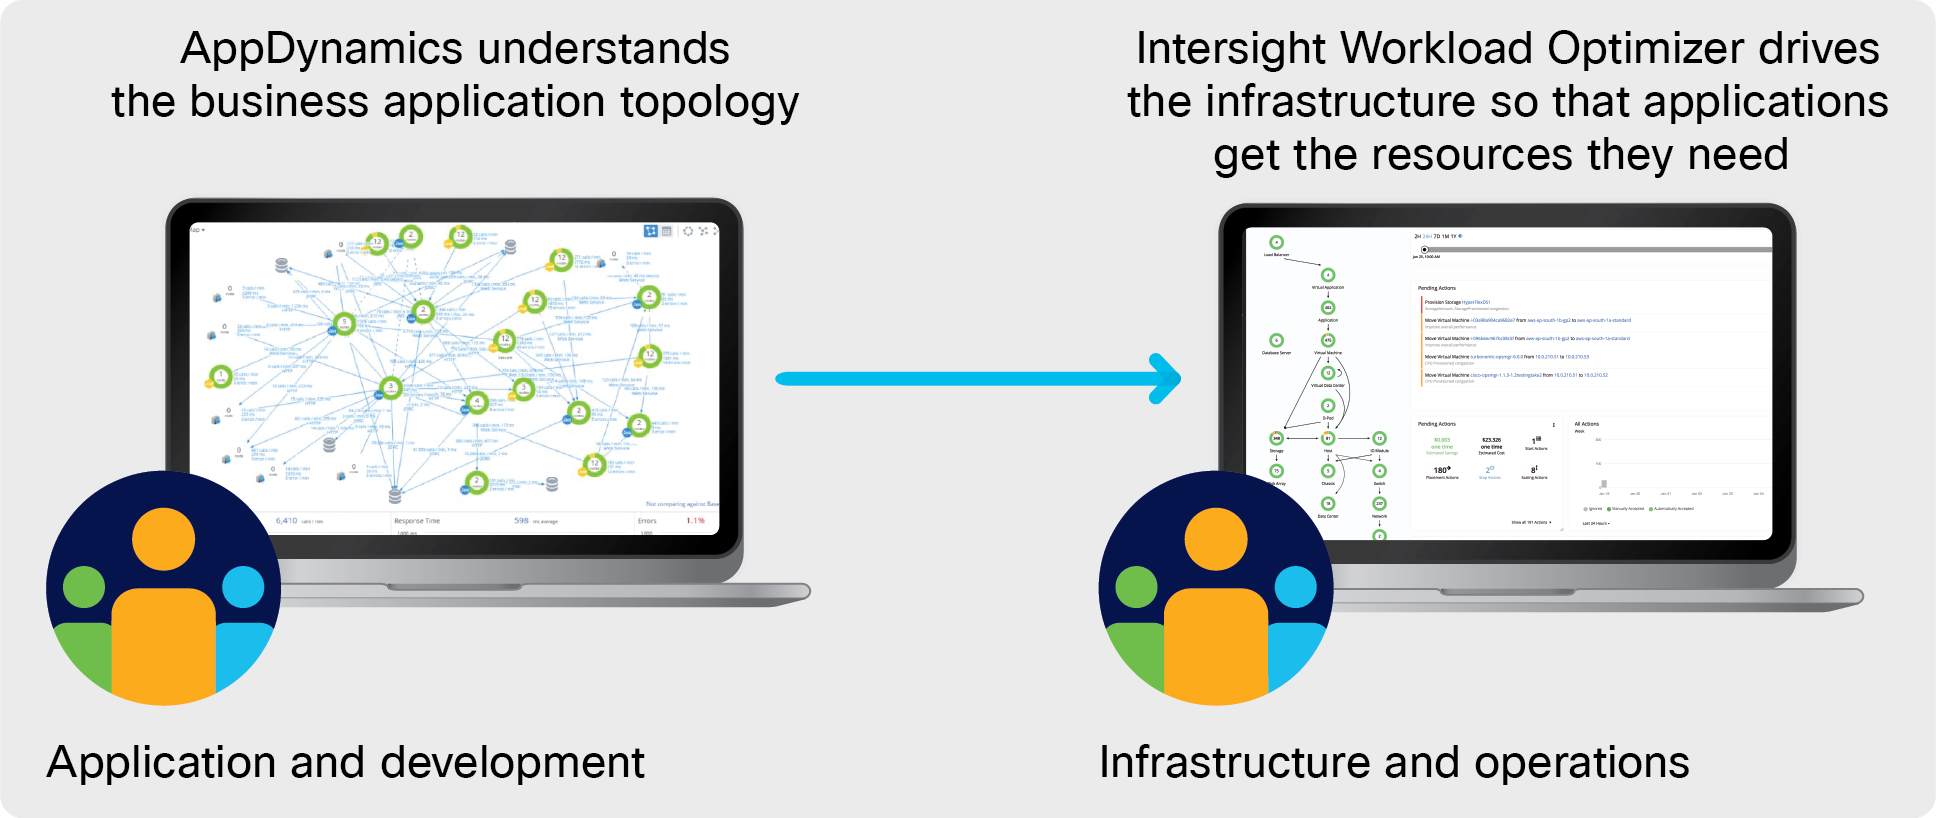 Intersight Workload Optimizer and AppDynamics